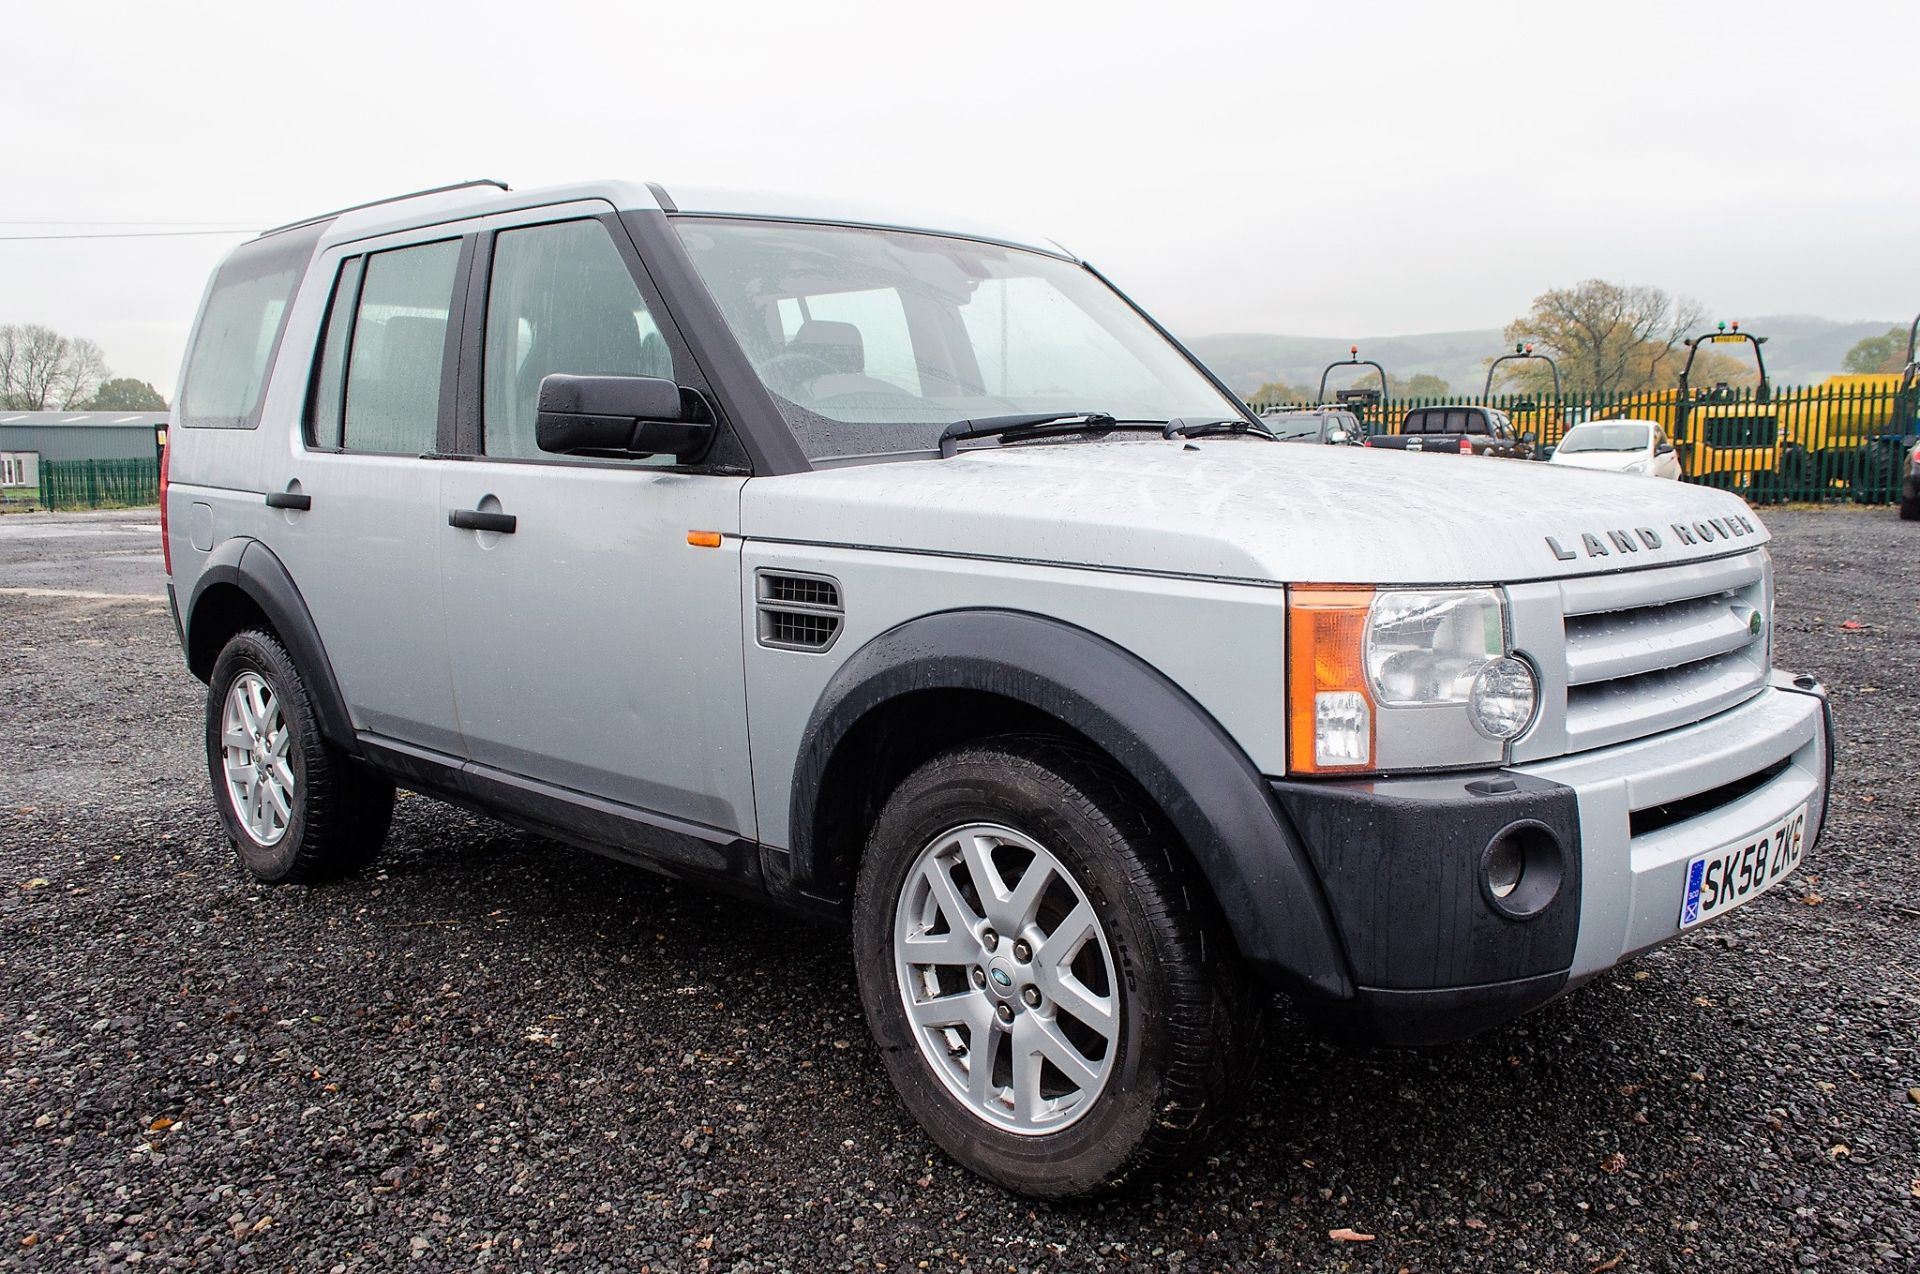 Land Rover Discovery 3 TDV6 XS 5 door 4wd estate car Registration Number: SK58 ZKC Date of - Image 2 of 31